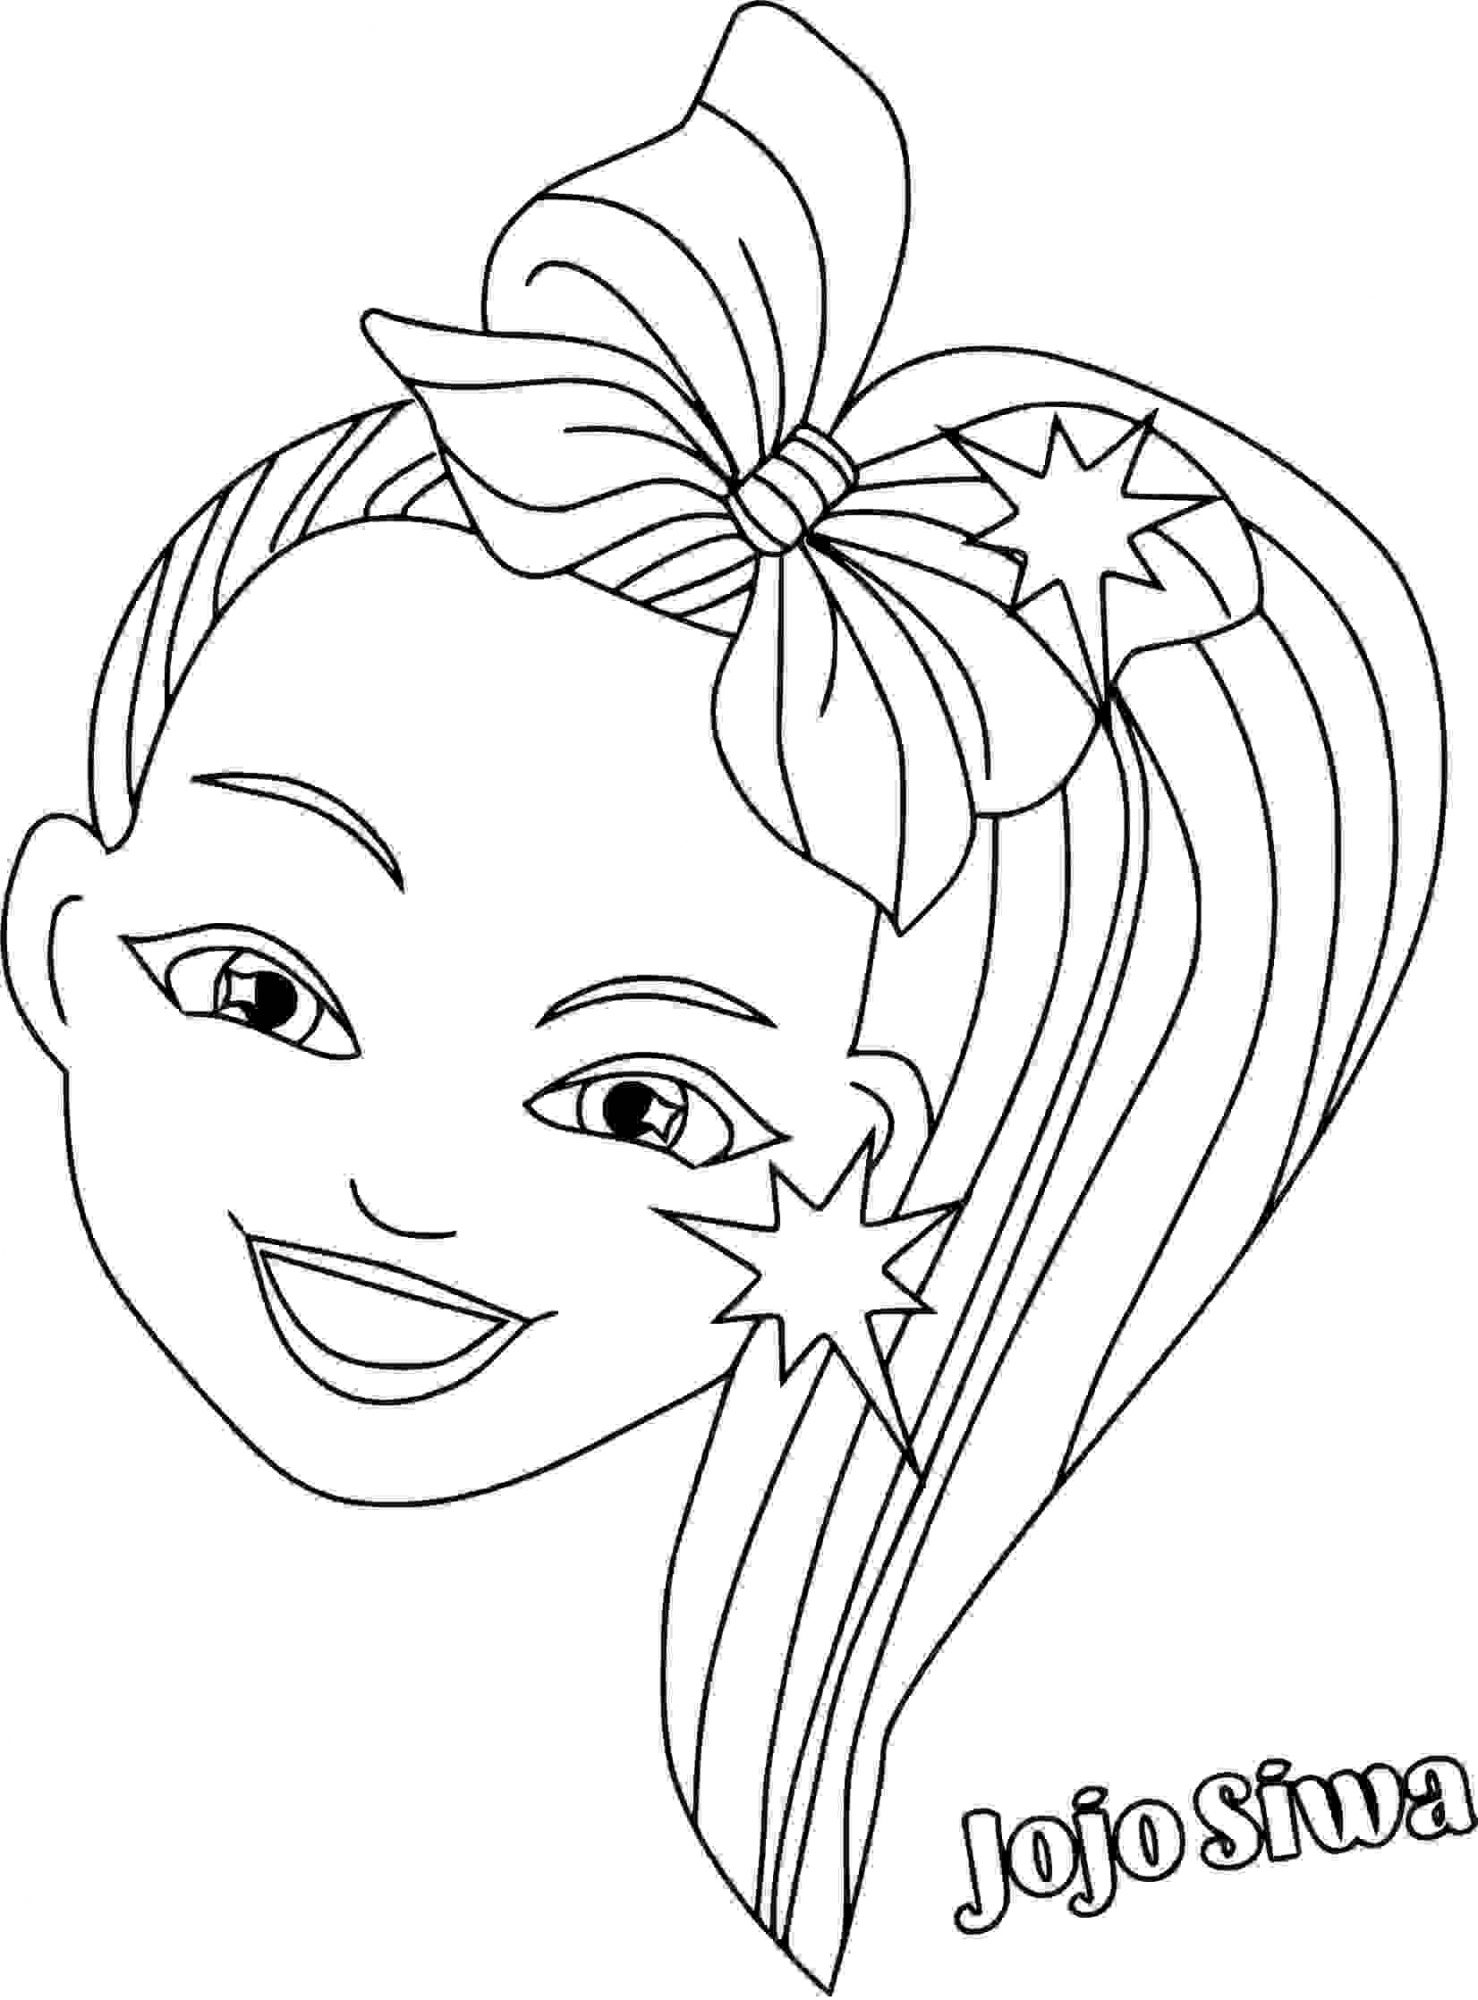 Head of Jojo Siwa with colorful hair Coloring Page